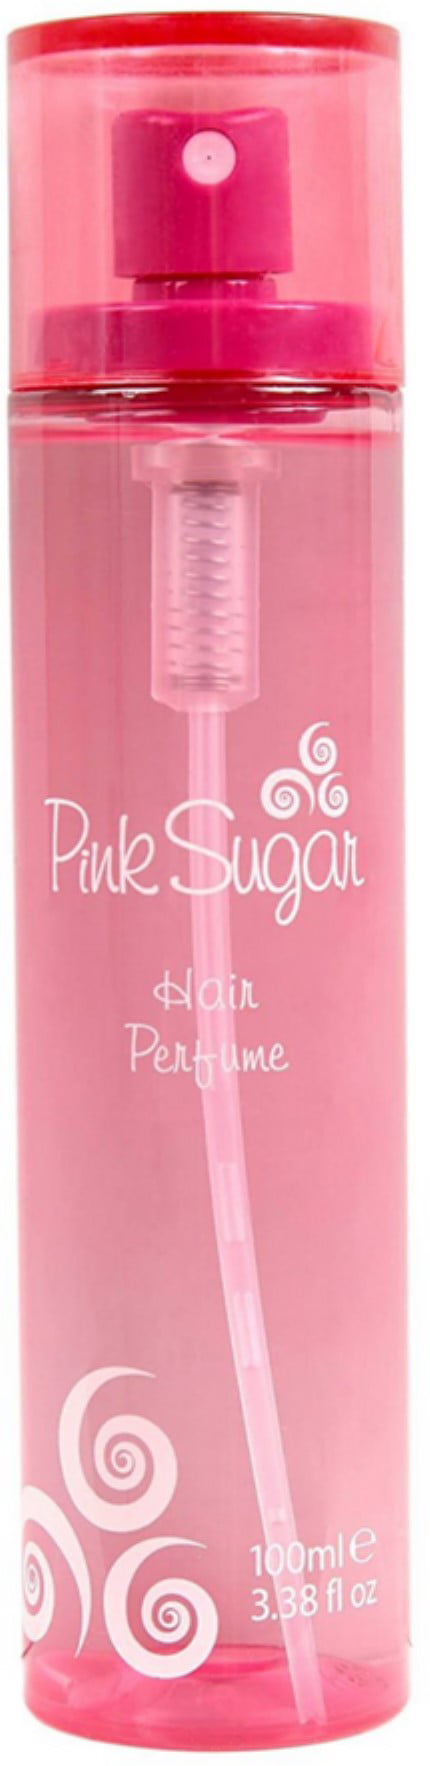 pink candy perfume